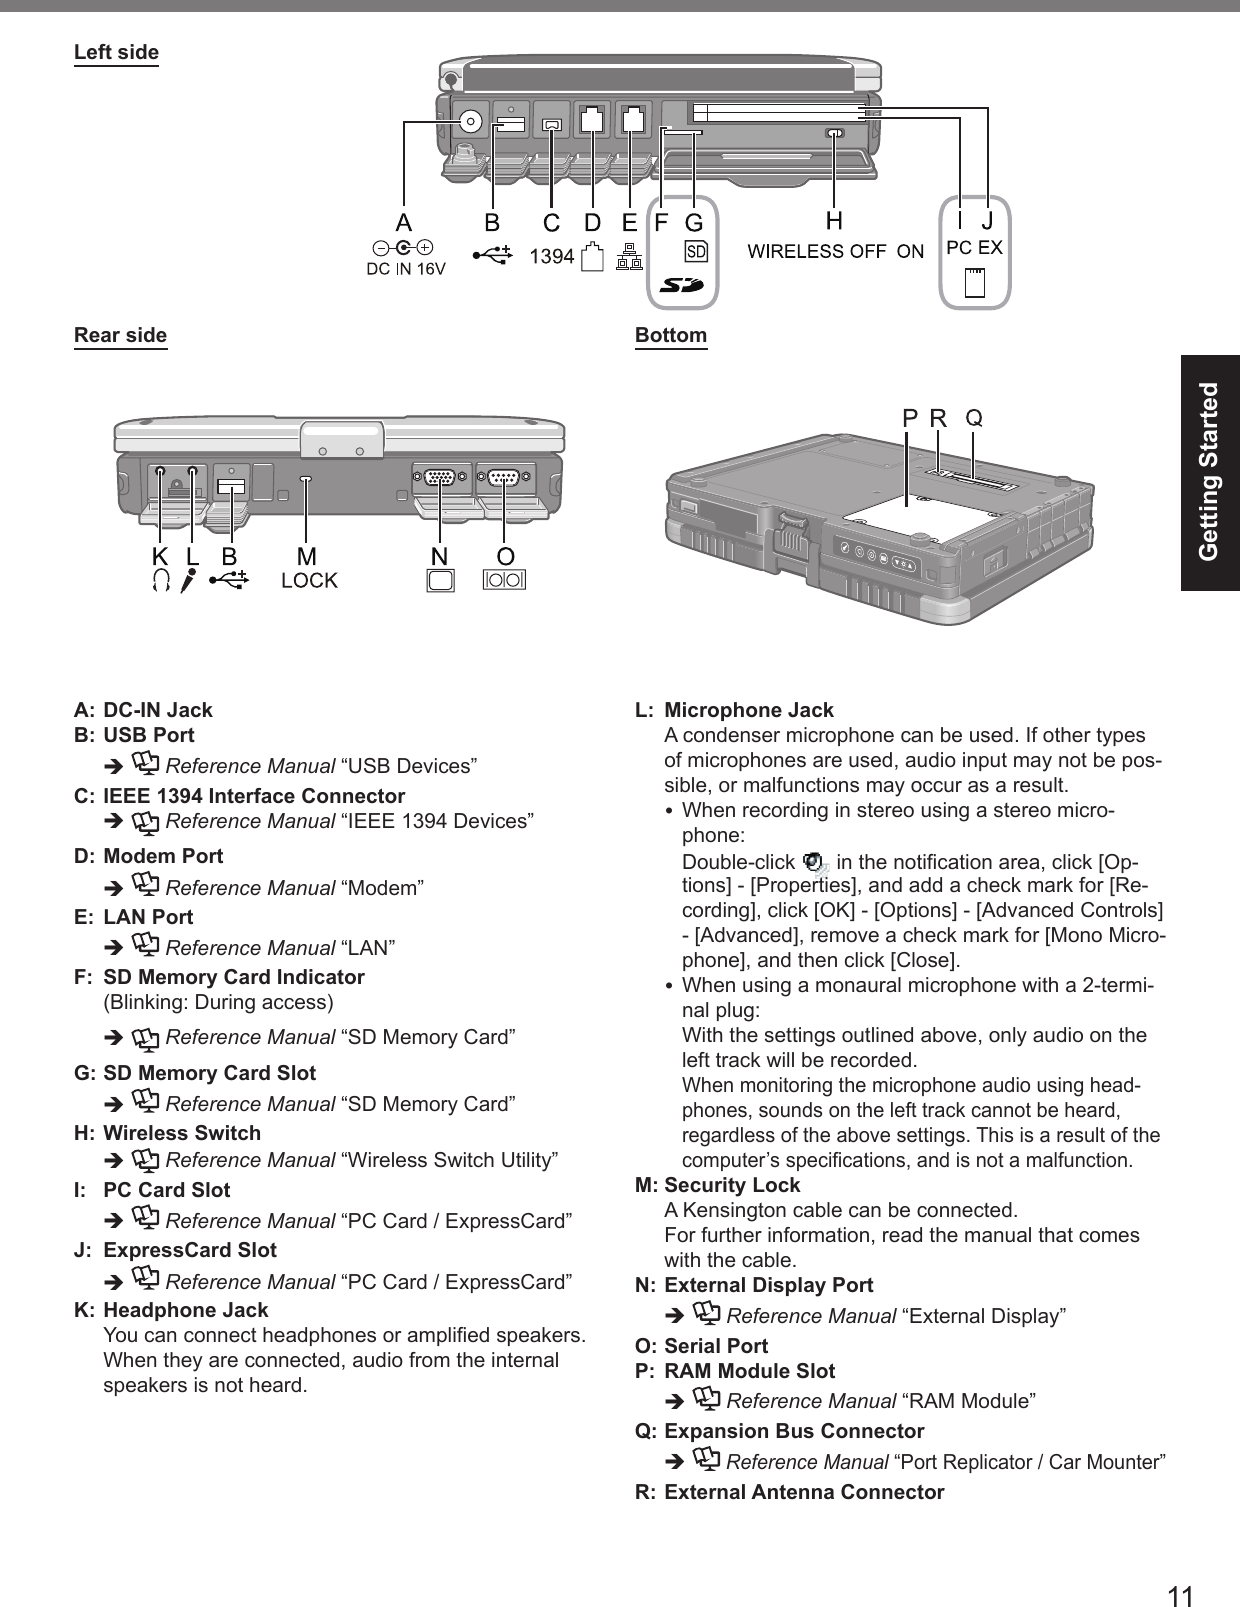 11Getting StartedLeft sideRear side BottomA: DC-IN JackB: USB PortÎ  Reference Manual “USB Devices”C: IEEE 1394 Interface ConnectorÎ  Reference Manual “IEEE 1394 Devices”D: Modem PortÎ  Reference Manual “Modem”E: LAN PortÎ  Reference Manual “LAN”F:  SD Memory Card Indicator(Blinking: During access)Î  Reference Manual “SD Memory Card”G: SD Memory Card SlotÎ  Reference Manual “SD Memory Card”H: Wireless SwitchÎ  Reference Manual “Wireless Switch Utility”I:  PC Card Slot Î  Reference Manual “PC Card / ExpressCard”J: ExpressCard SlotÎ  Reference Manual “PC Card / ExpressCard”K: Headphone Jack  You can connect headphones or ampliﬁ ed speakers. When they are connected, audio from the internal speakers is not heard.L: Microphone Jack  A condenser microphone can be used. If other types of microphones are used, audio input may not be pos-sible, or malfunctions may occur as a result.y When recording in stereo using a stereo micro-phone:Double-click   in the notiﬁ cation area, click [Op-tions] - [Properties], and add a check mark for [Re-cording], click [OK] - [Options] - [Advanced Controls] - [Advanced], remove a check mark for [Mono Micro-phone], and then click [Close].y When using a monaural microphone with a 2-termi-nal plug:With the settings outlined above, only audio on the left track will be recorded.When monitoring the microphone audio using head-phones, sounds on the left track cannot be heard, regardless of the above settings. This is a result of the computer’s speciﬁ cations, and is not a malfunction.M: Security Lock  A Kensington cable can be connected.  For further information, read the manual that comes with the cable.N: External Display PortÎ  Reference Manual “External Display”O: Serial PortP: RAM Module SlotÎ  Reference Manual “RAM Module”Q: Expansion Bus ConnectorÎ  Reference Manual “Port Replicator / Car Mounter”R: External Antenna Connector